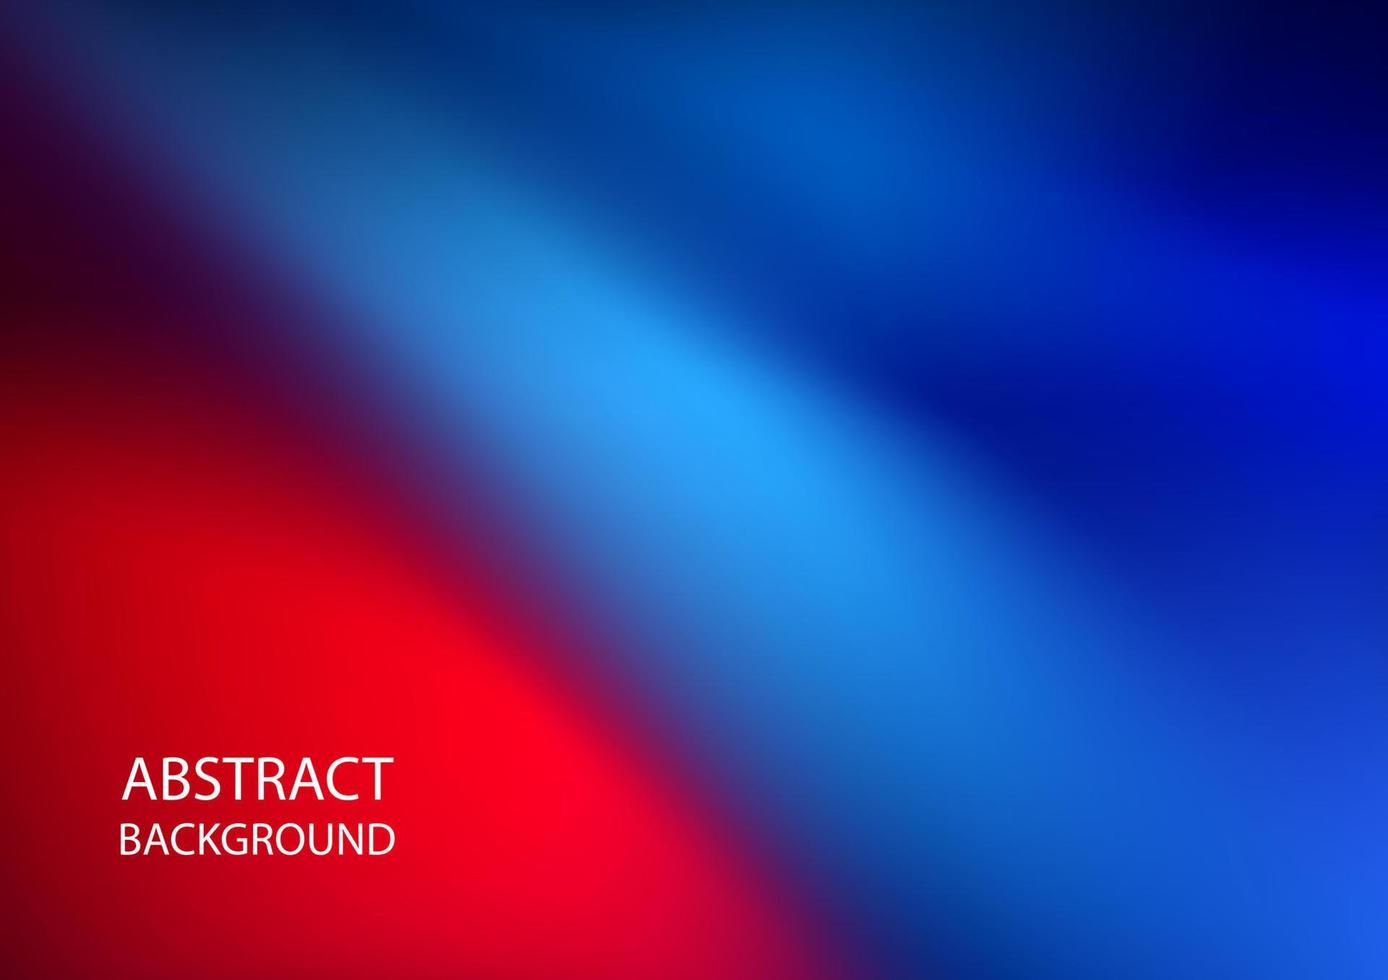 abstract background blue and red tone for wallpaper backdrop vector illustration